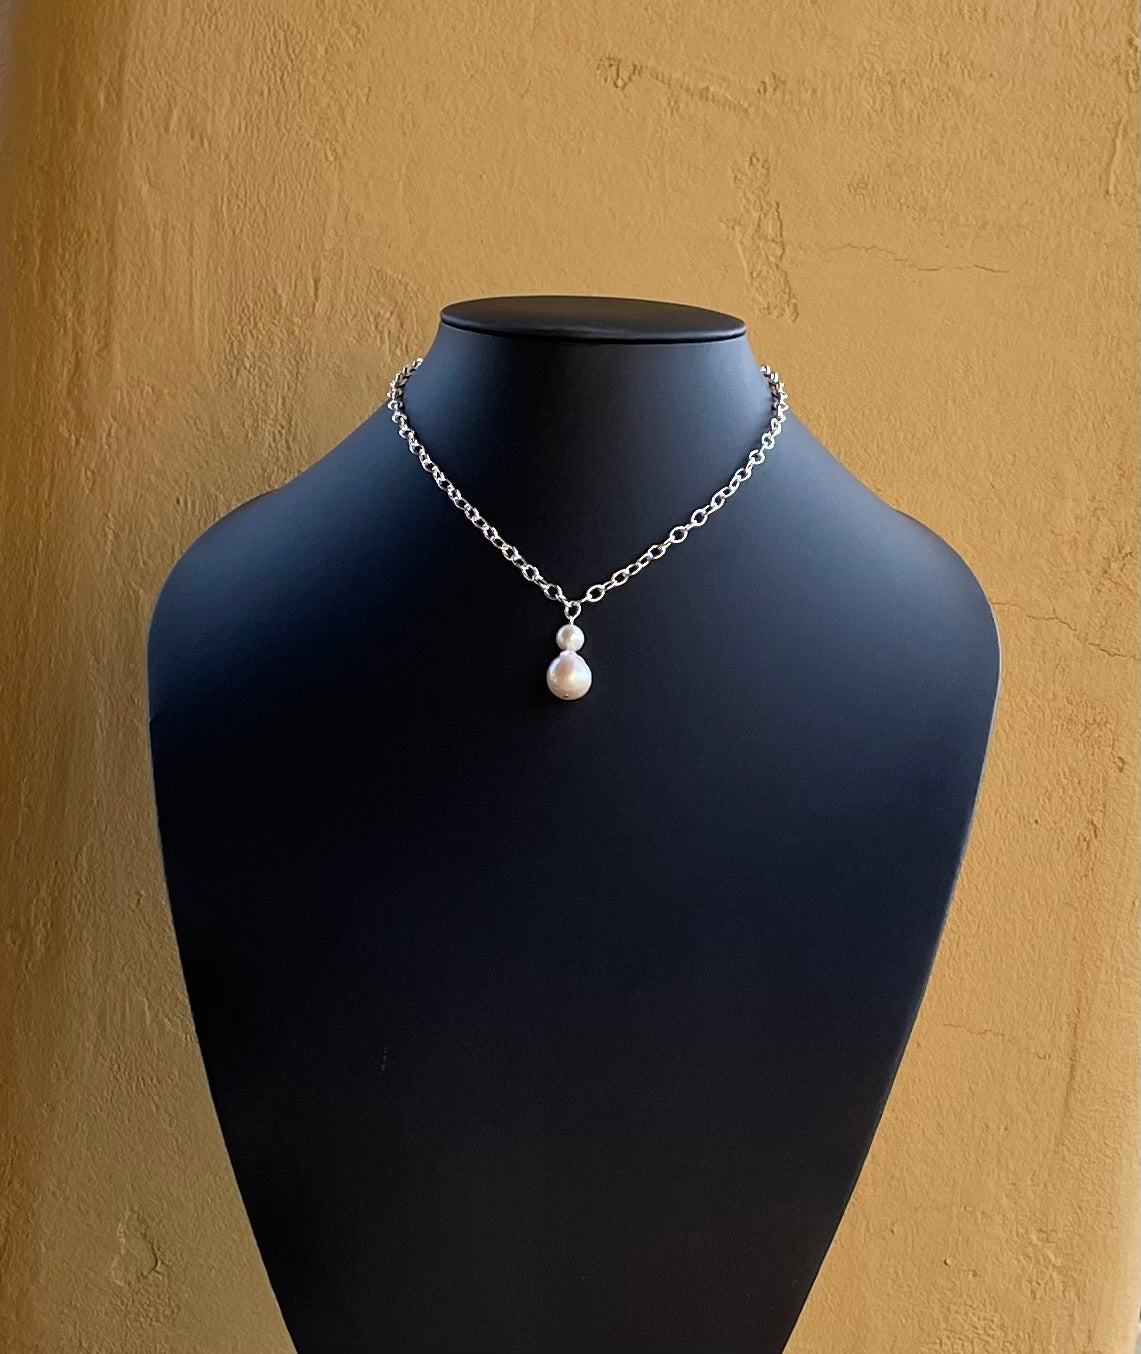 Necklace - Sterling silver necklace with pearl pendant